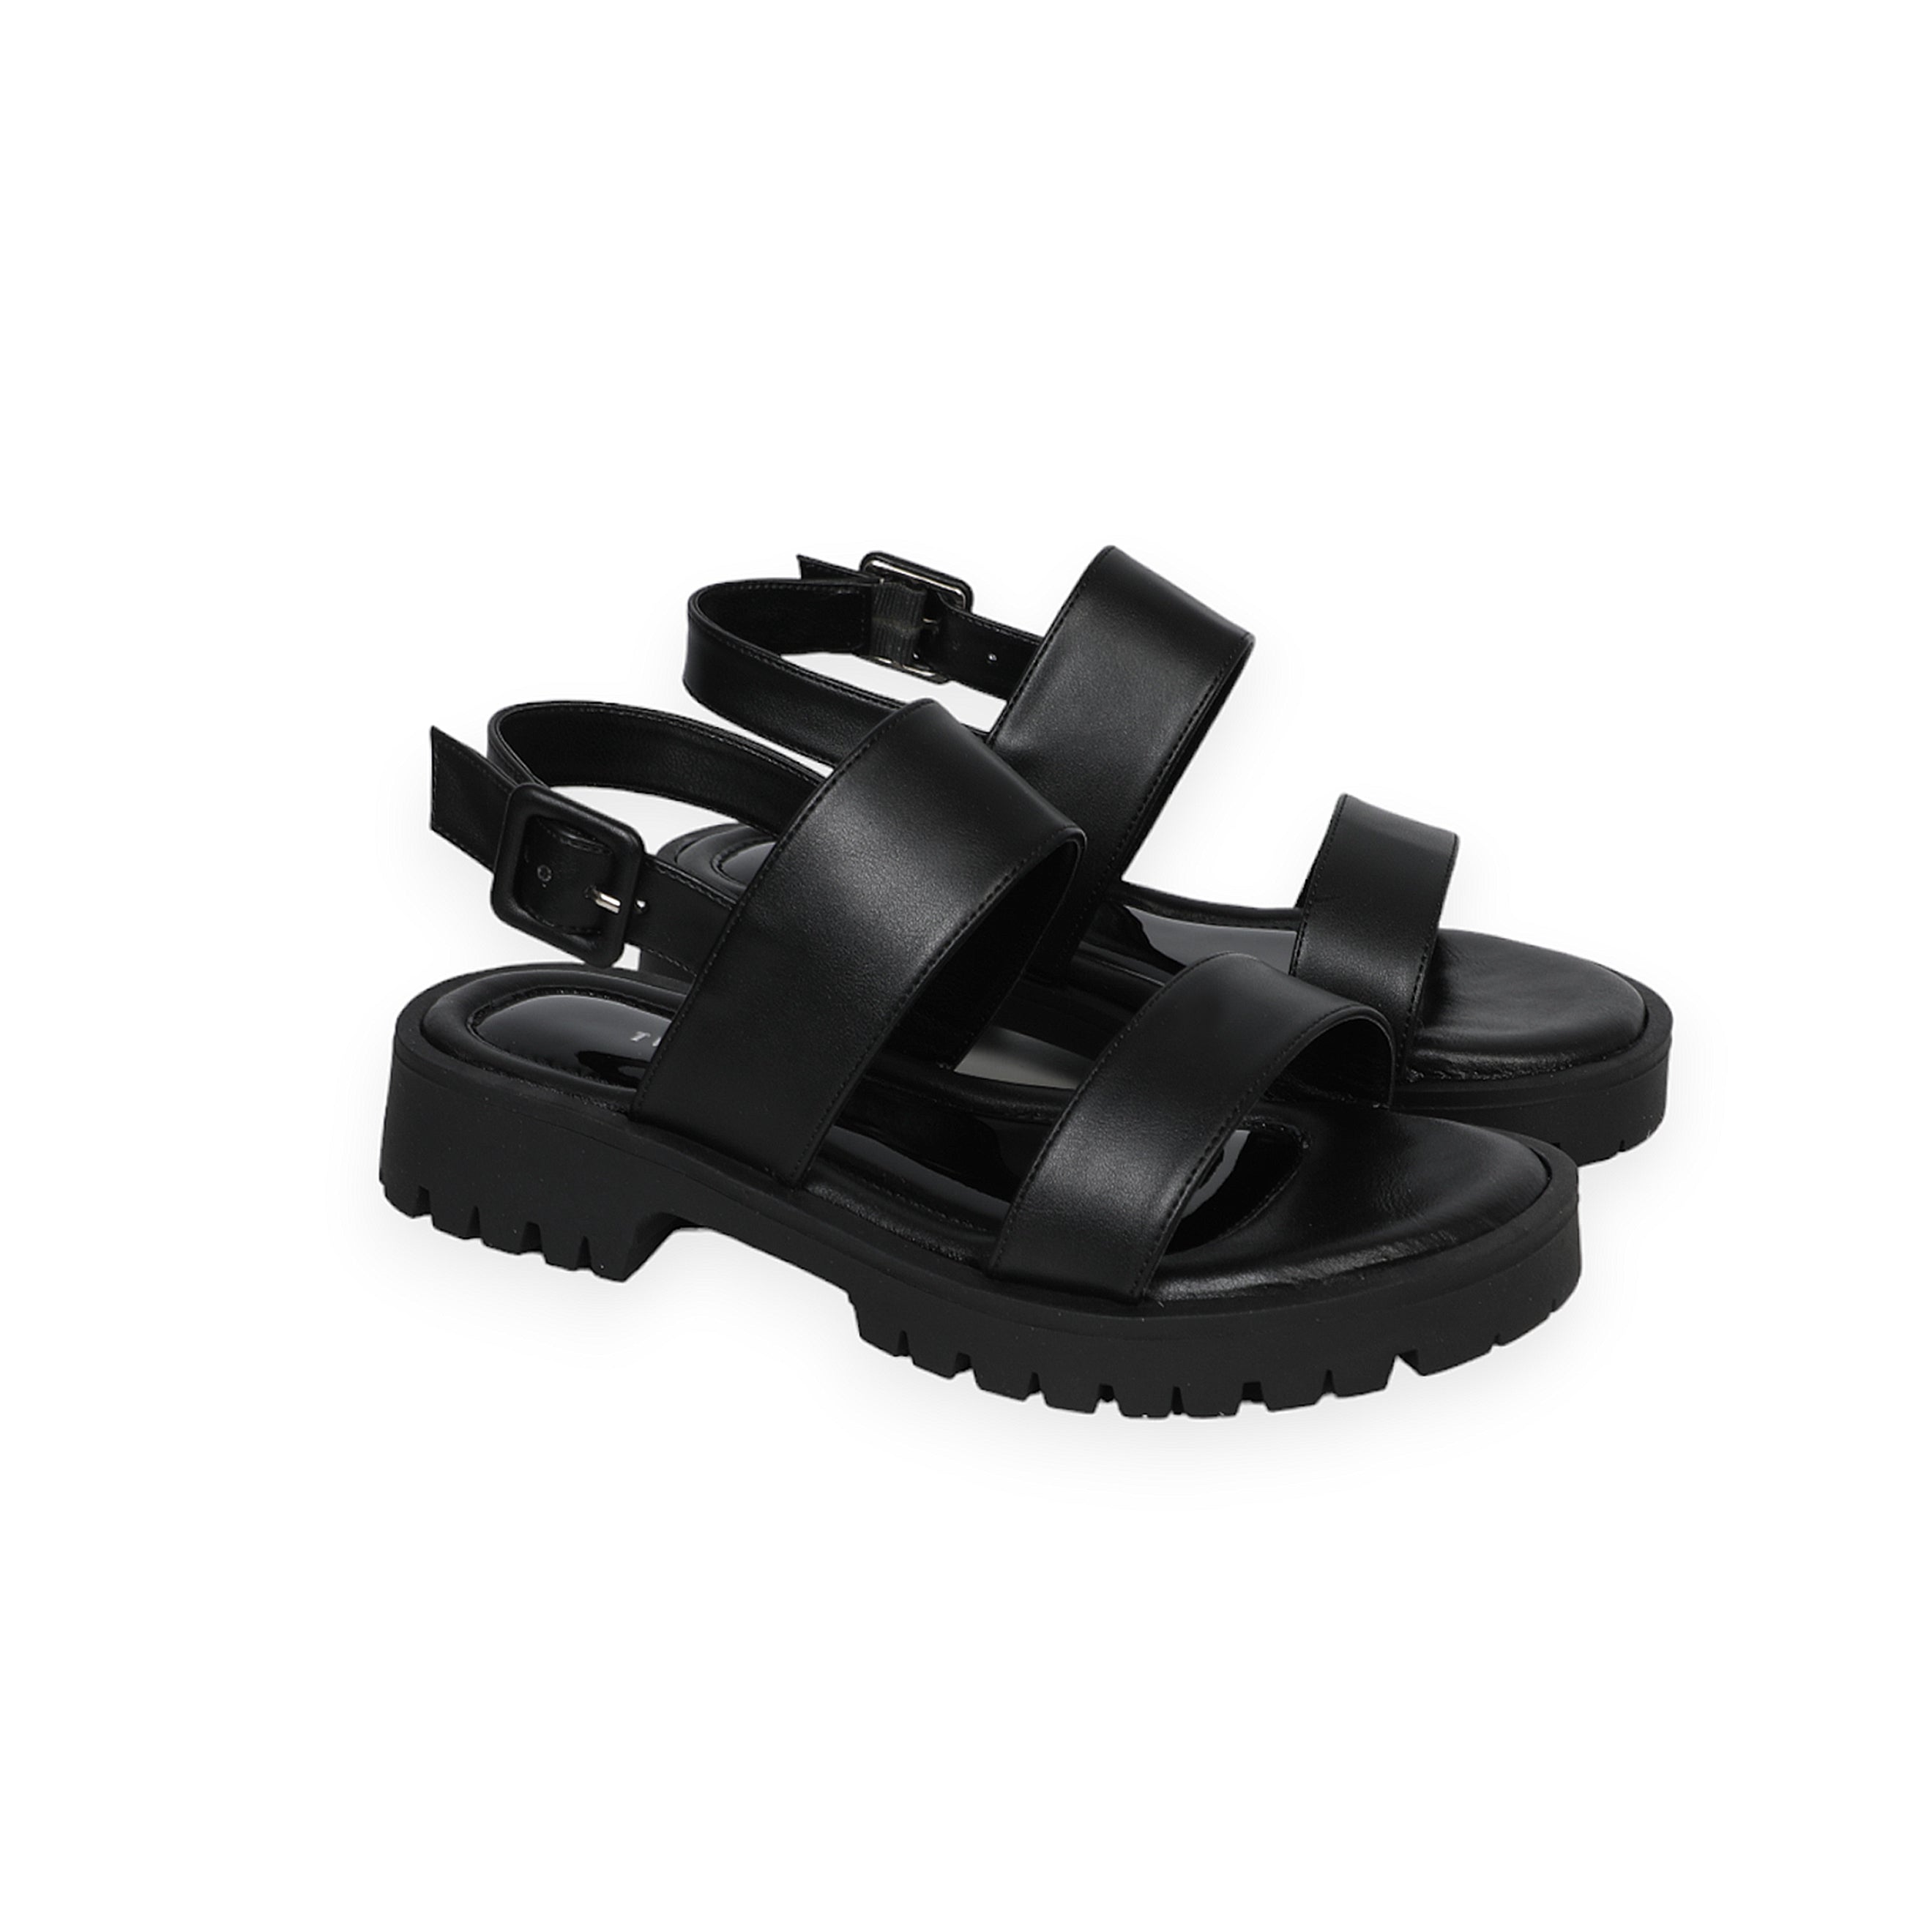 Comfortable Black Sandals With Ankle Strap